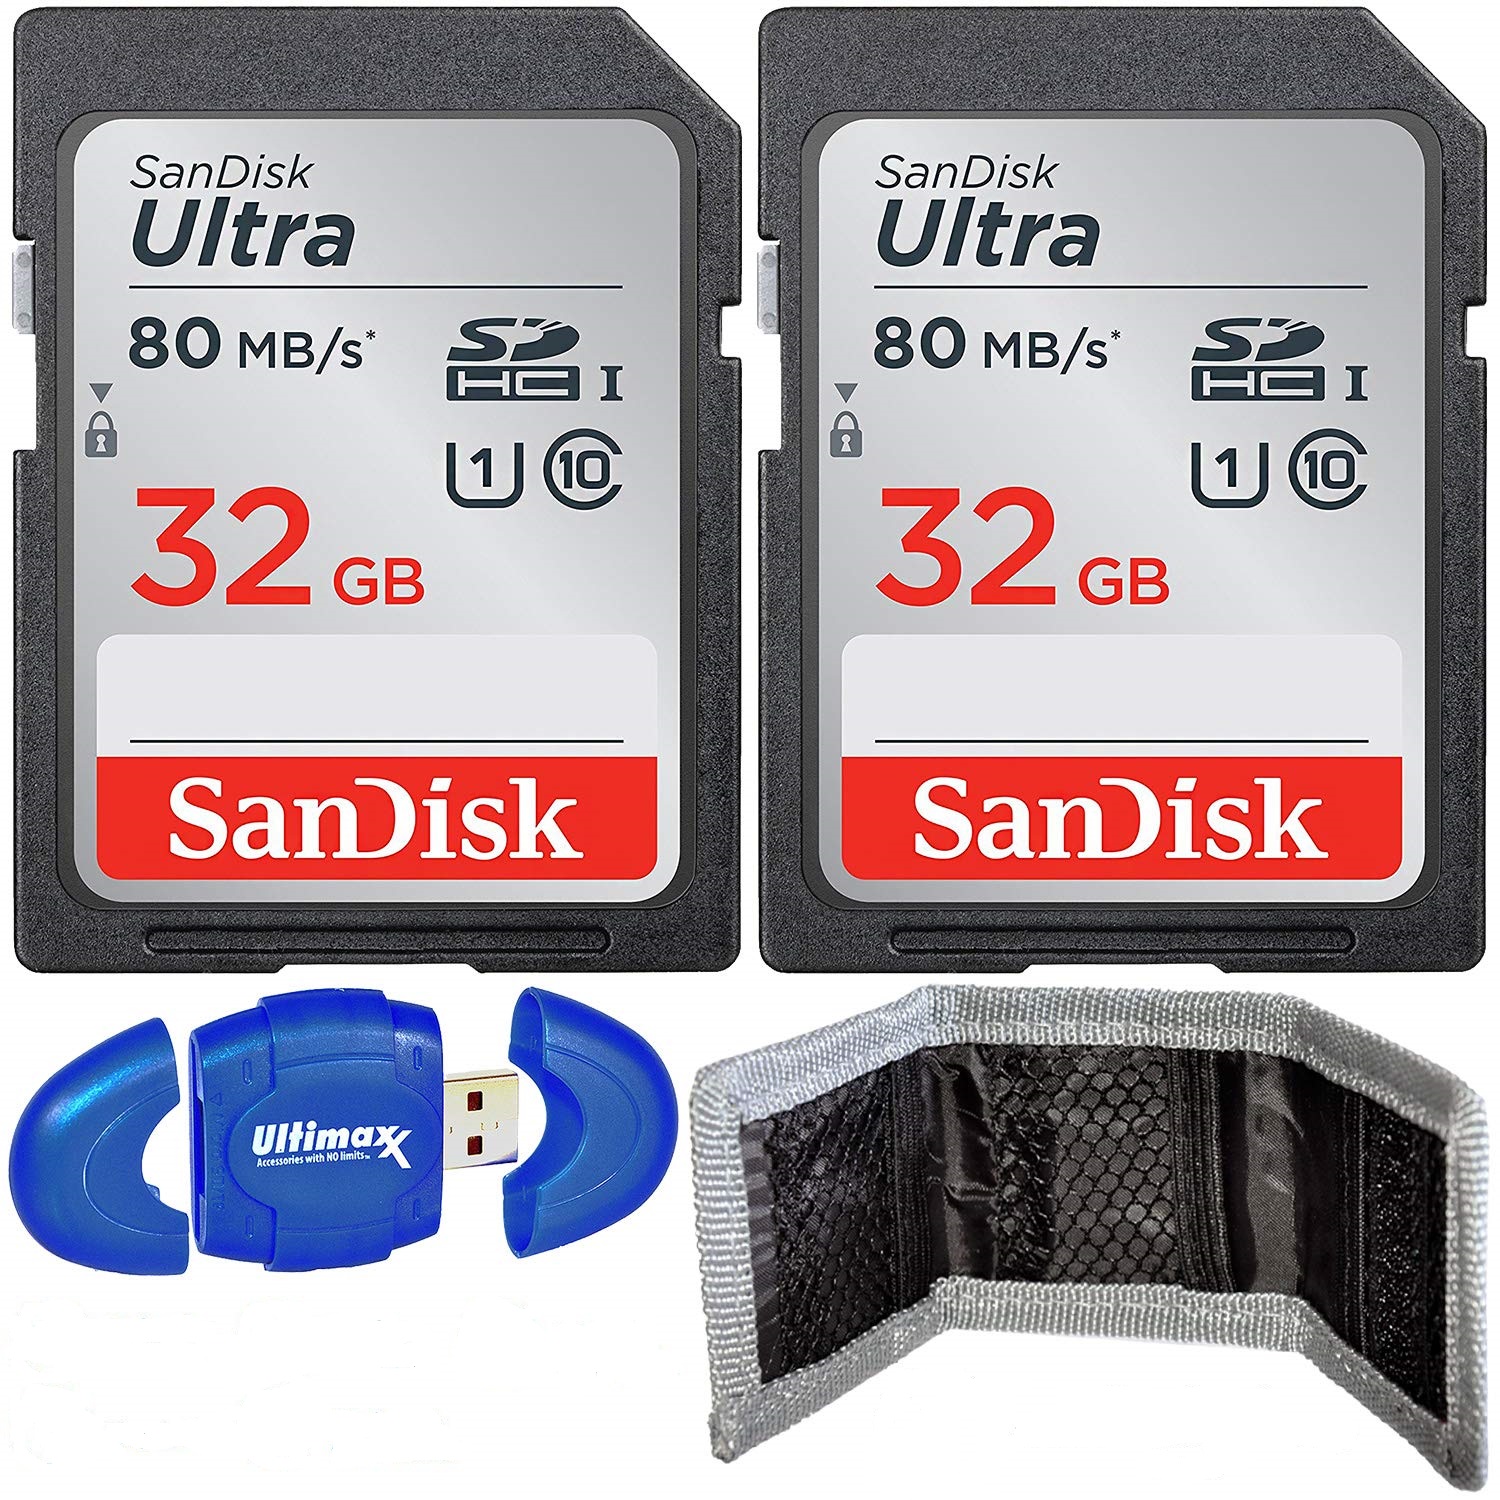 Dual SanDisk Ultra 32GB SDHC UHS-I/Class-10 Memory Cards (2 Cards) Bundle with High Speed Memory Card Reader & Memory Card Wallet